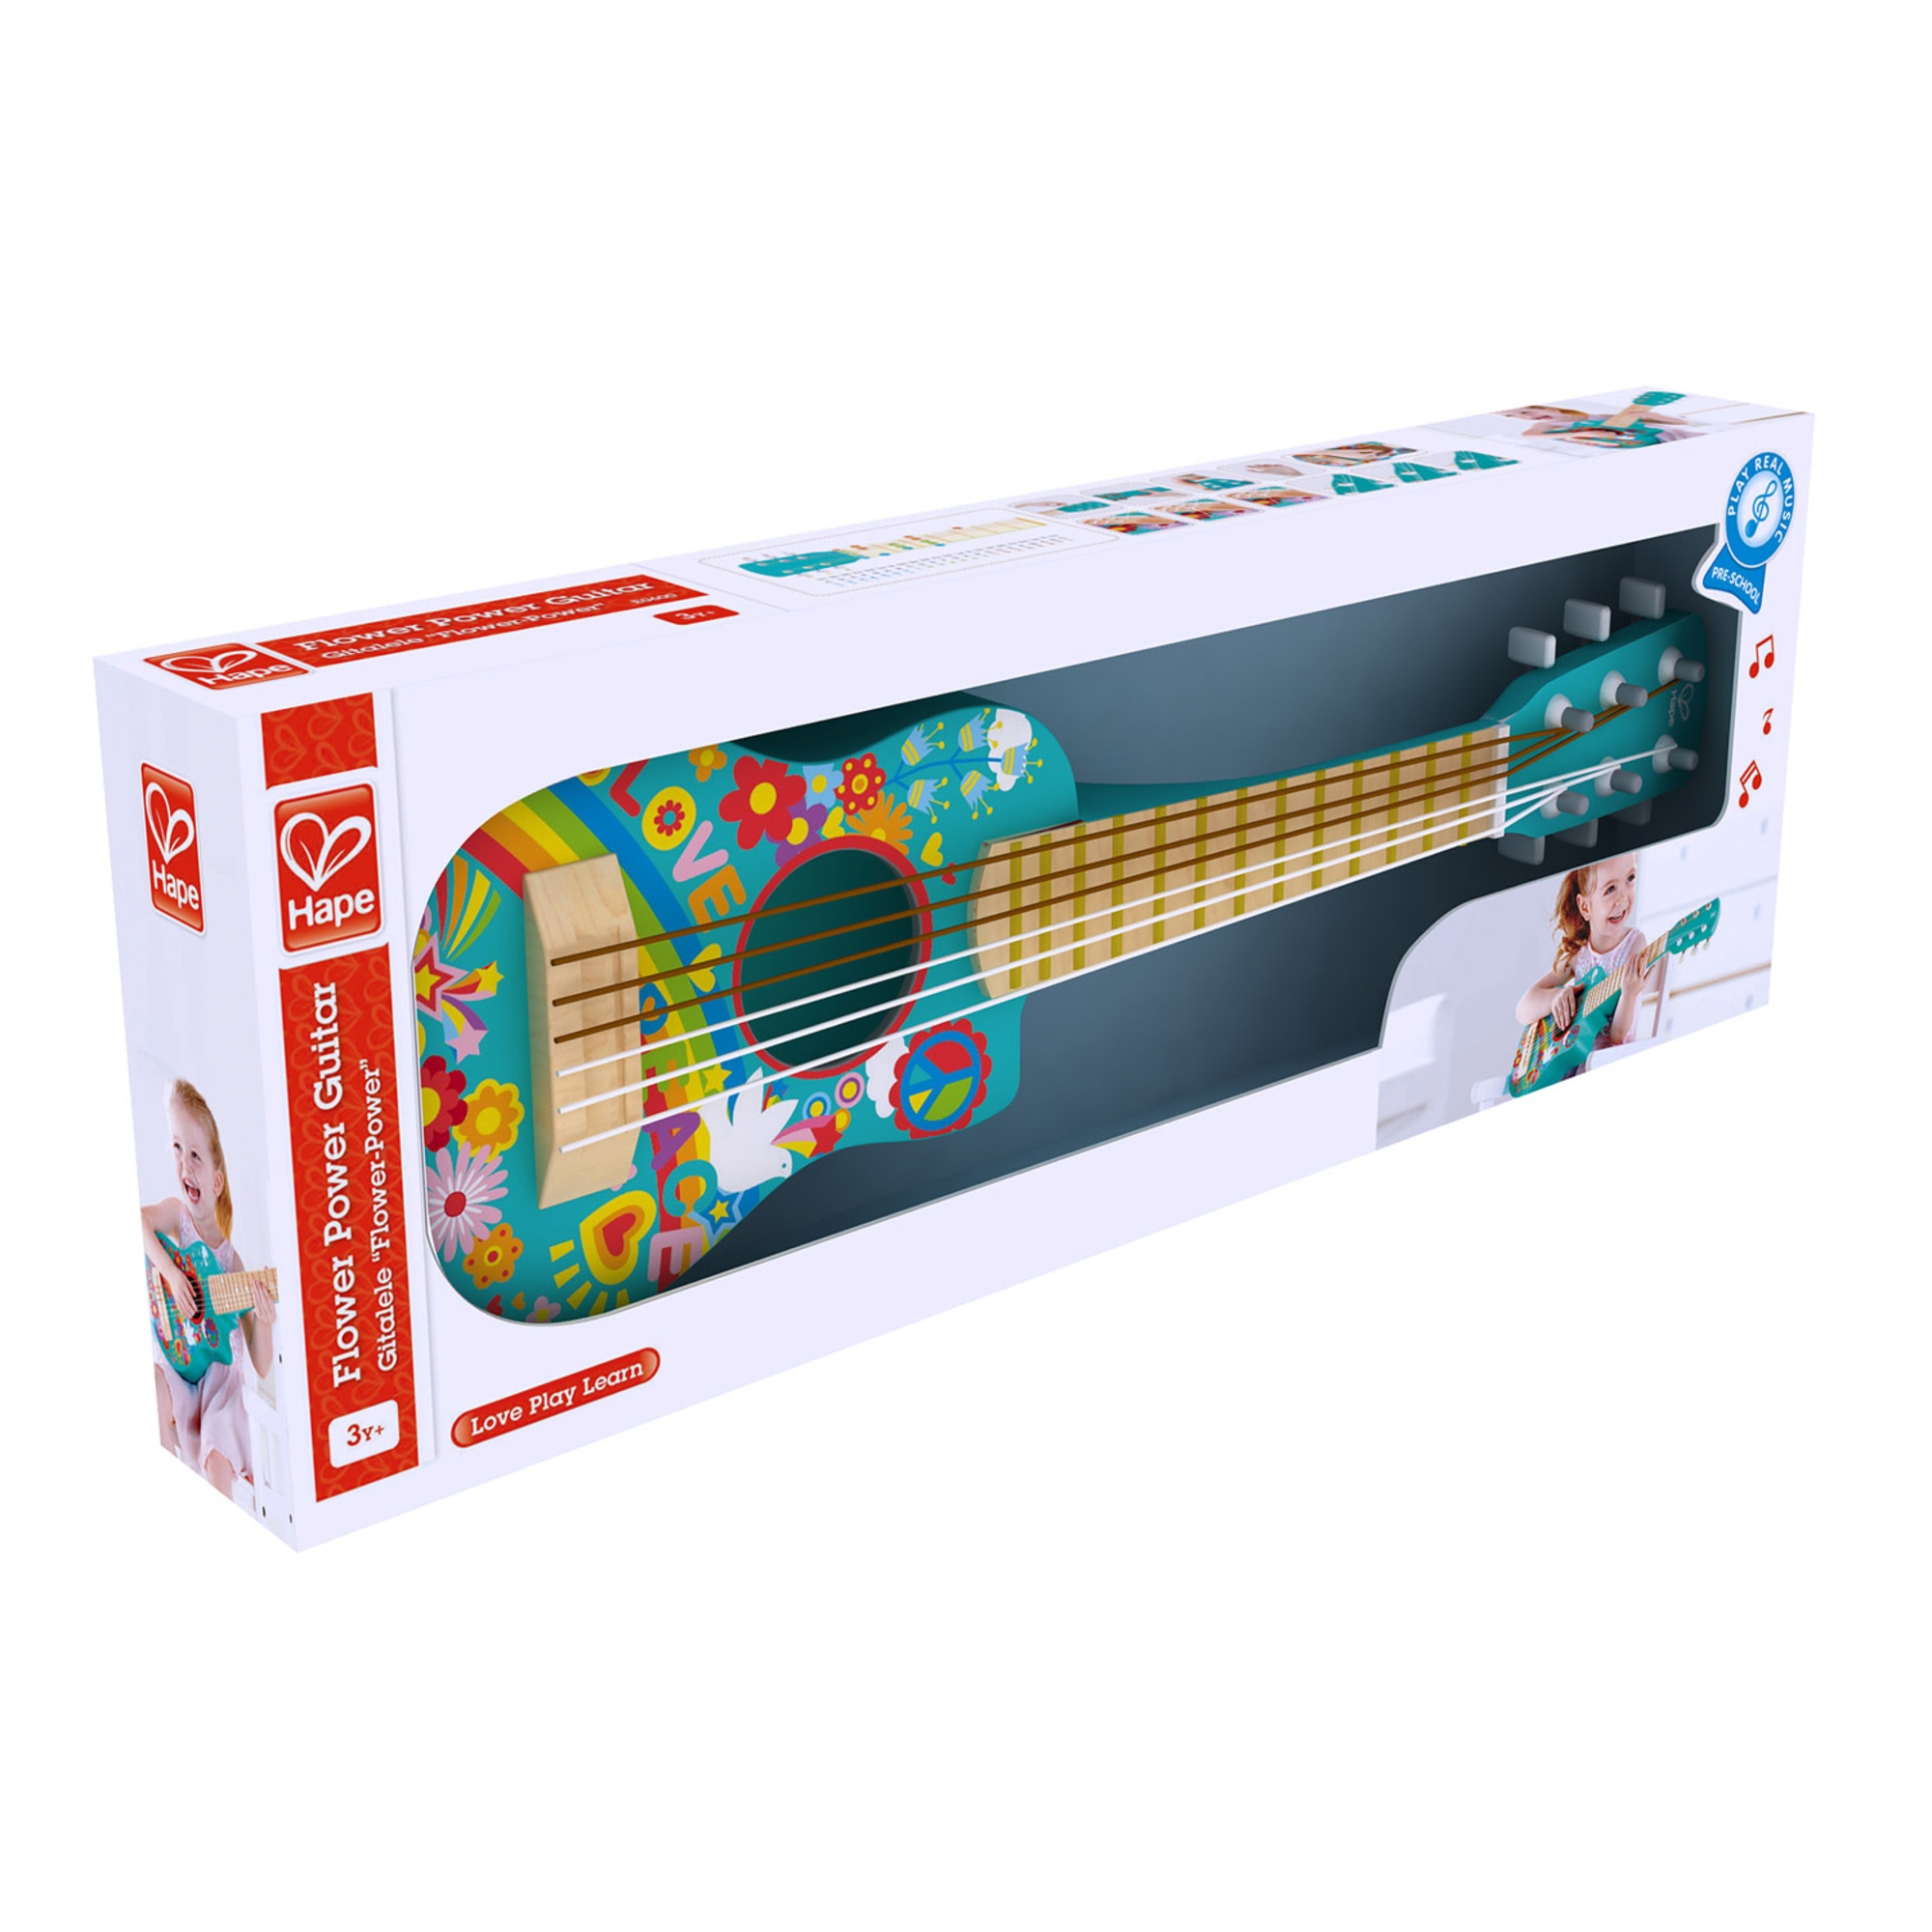 Hape First Flower Power 26" Musical Guitar in Turquoise for Preschool & Toddler - image 4 of 6